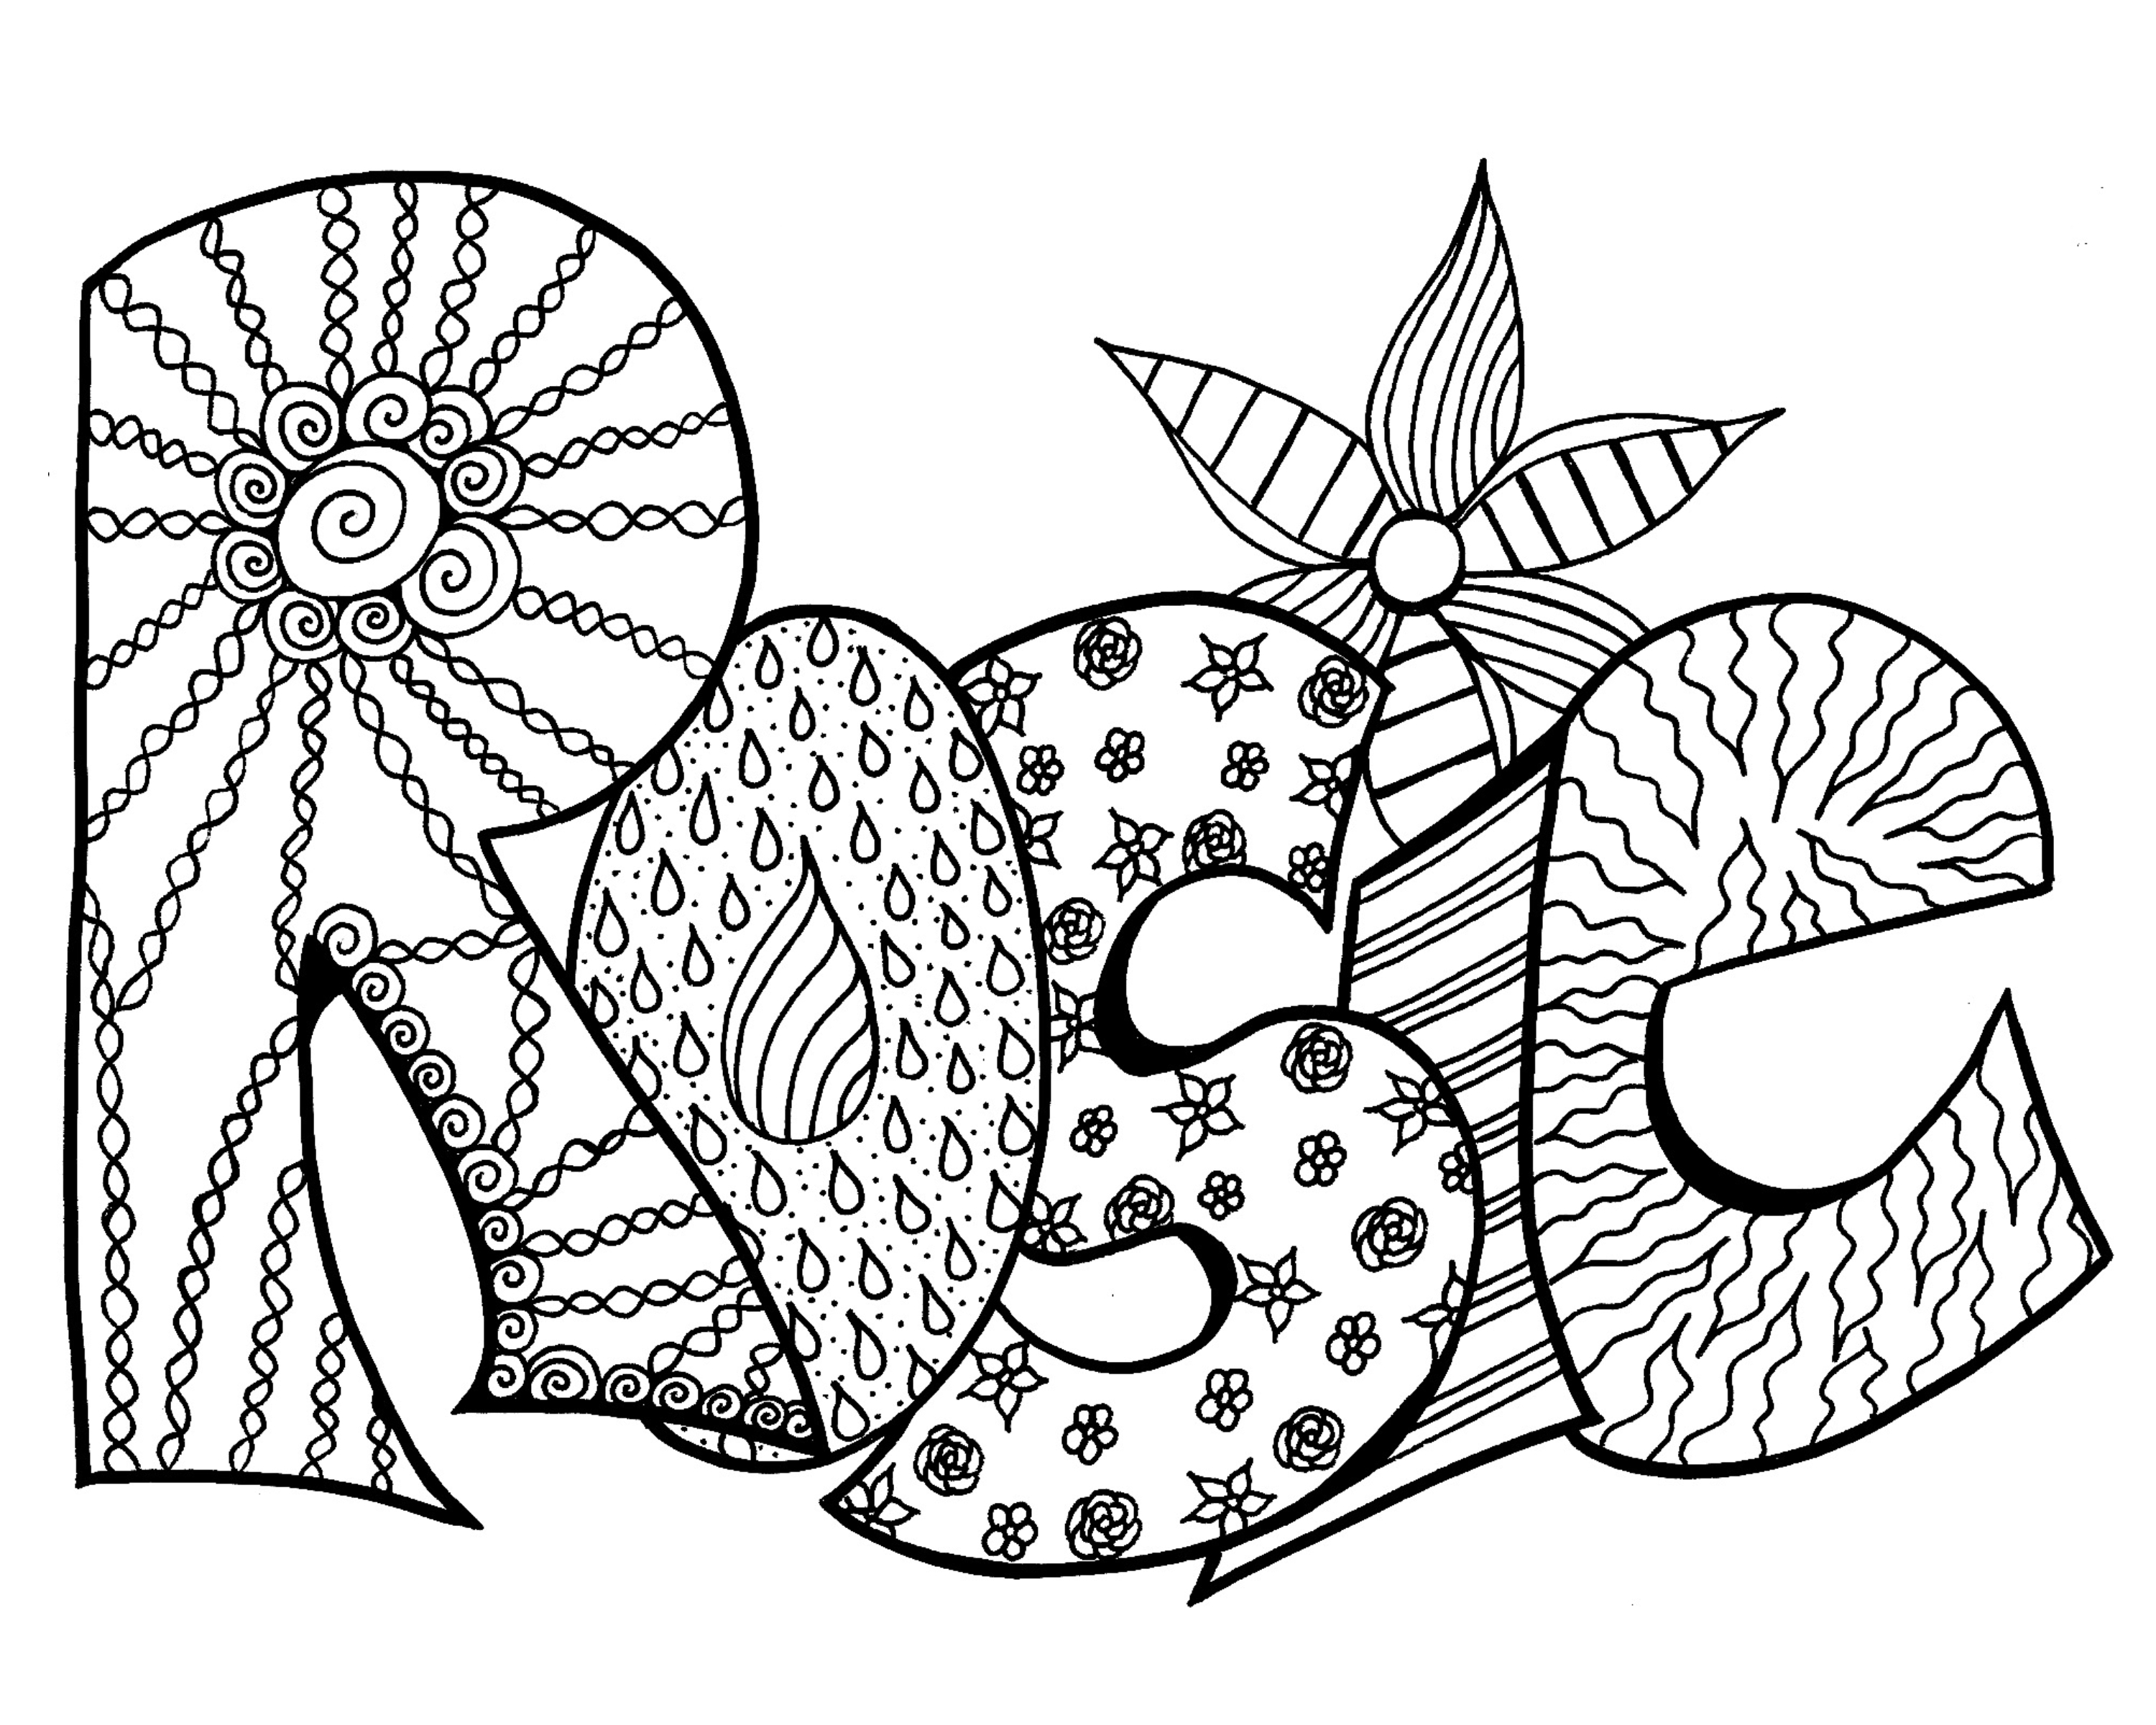 Free Personalized Coloring Pages At GetDrawings Free Download